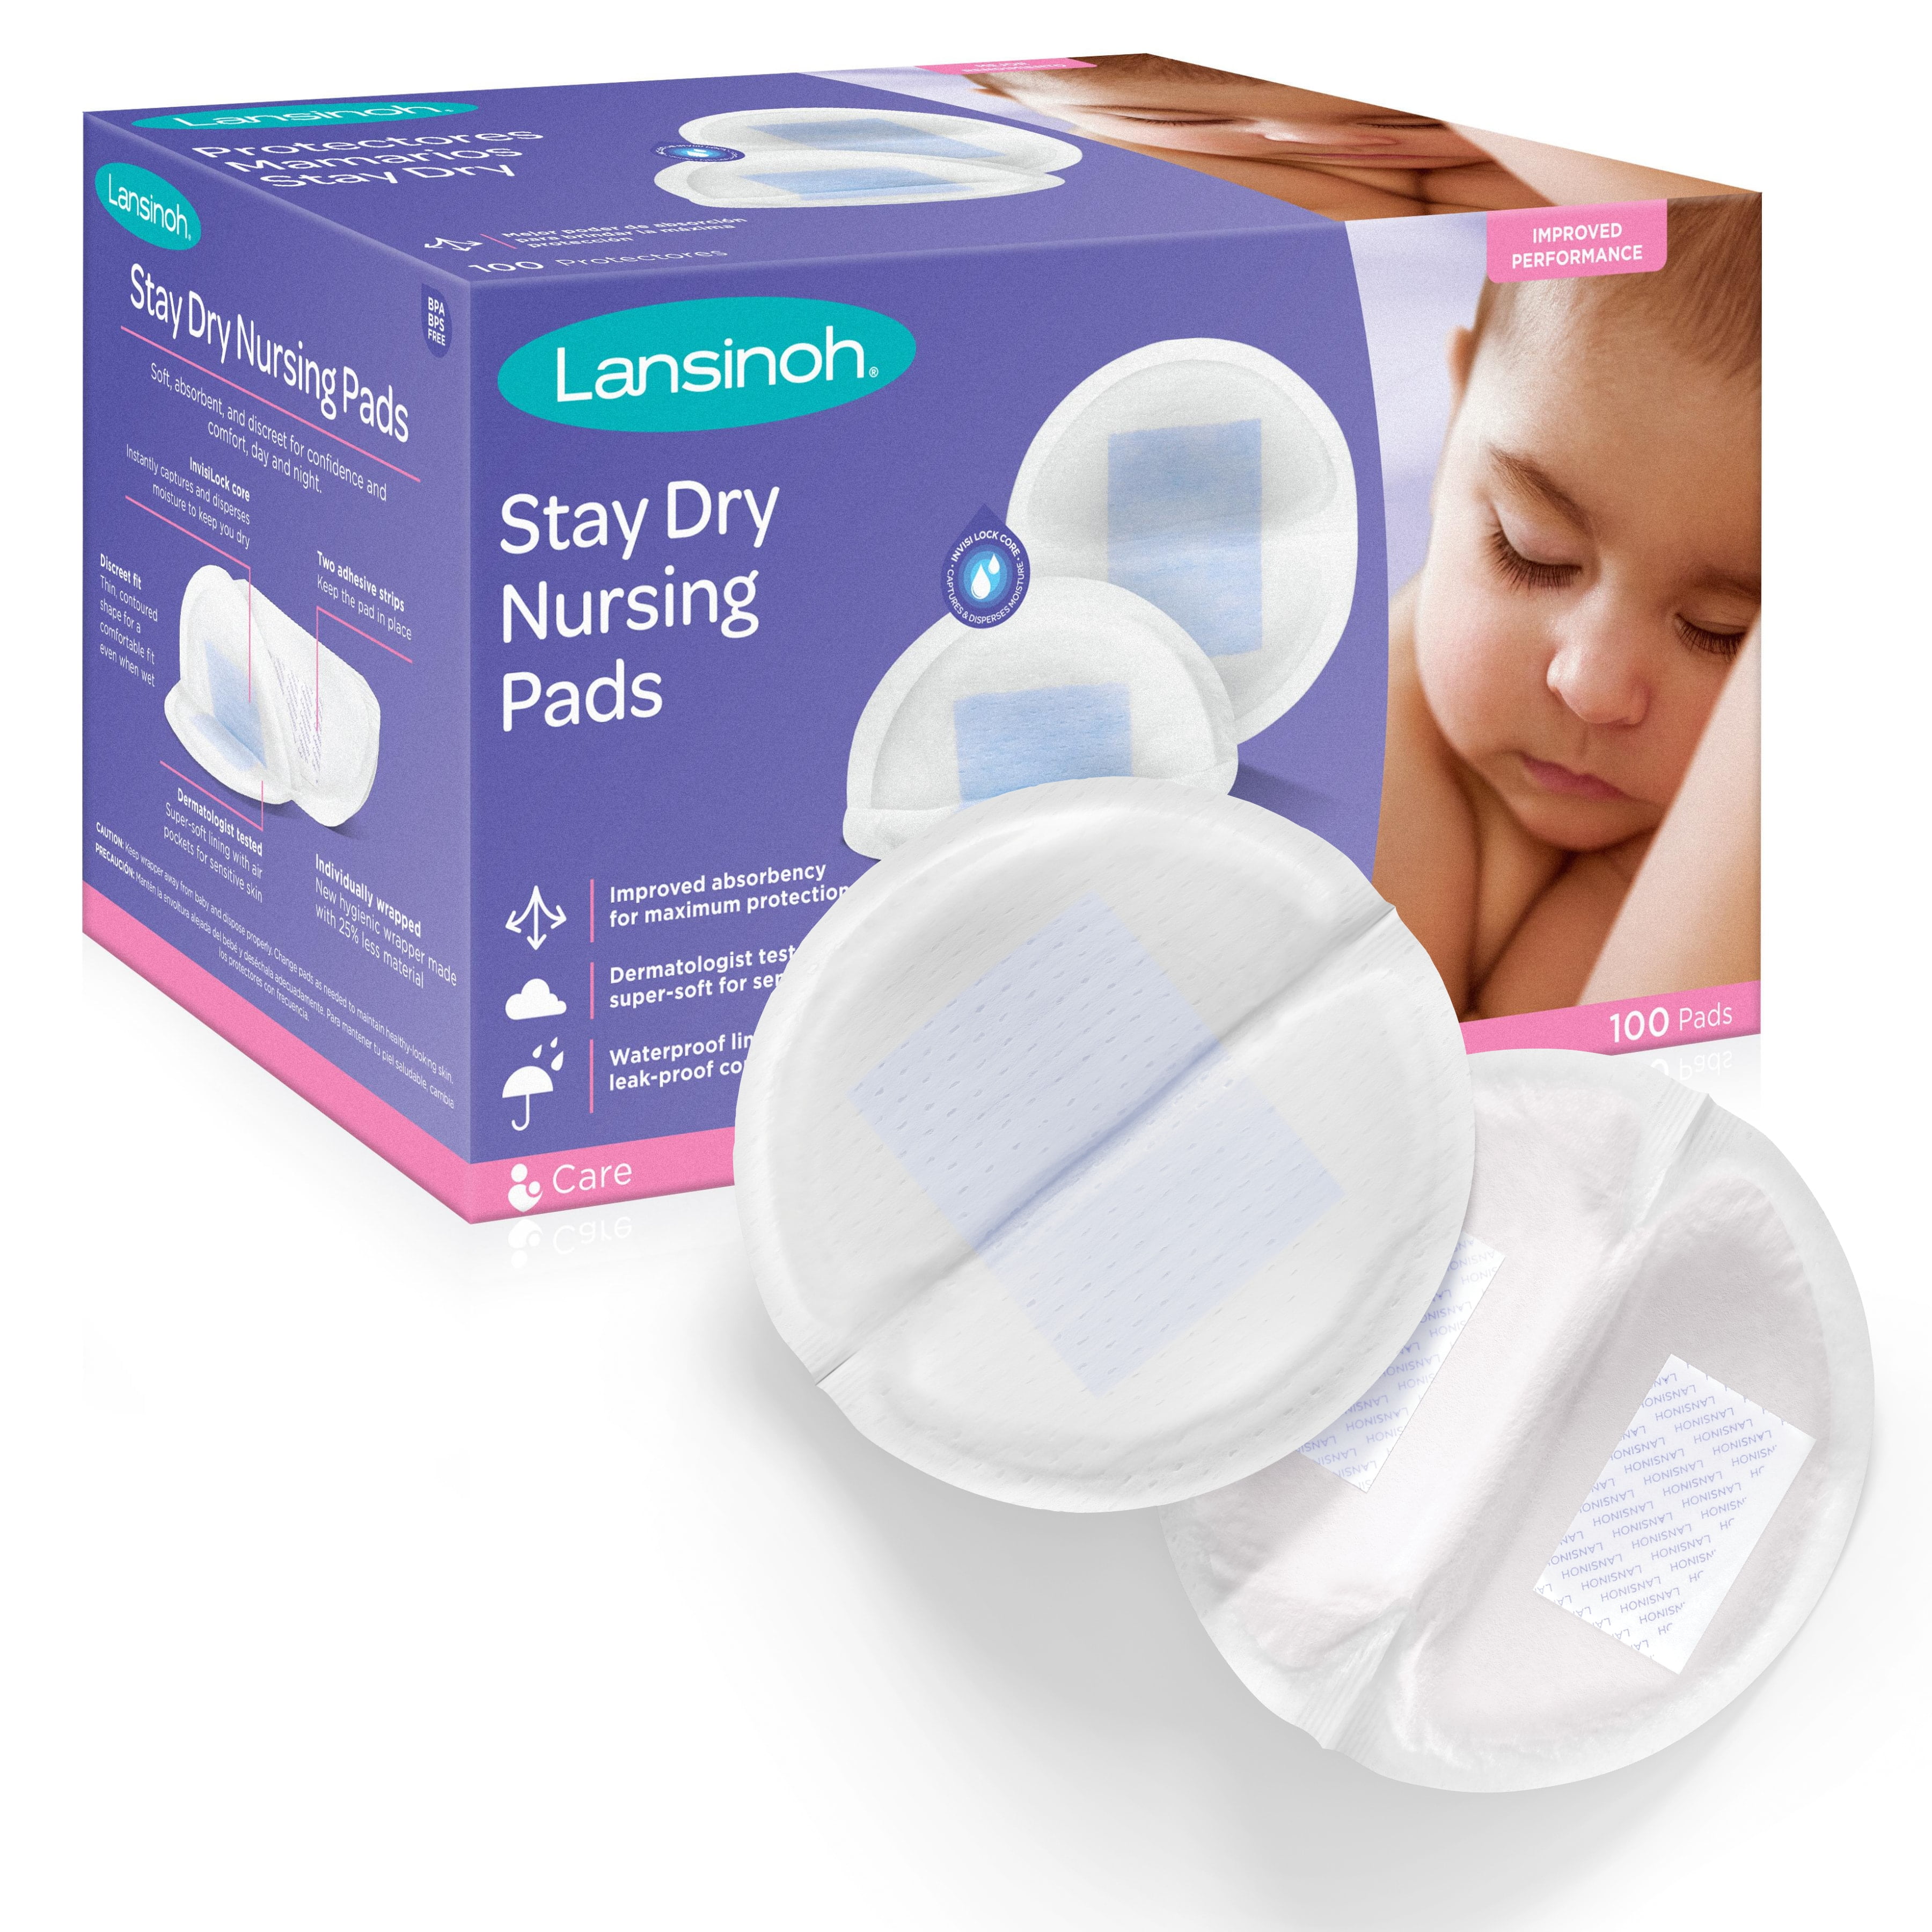 Lansinoh Stay Dry Disposable Nursing Pads for Breastfeeding, 100 Ct